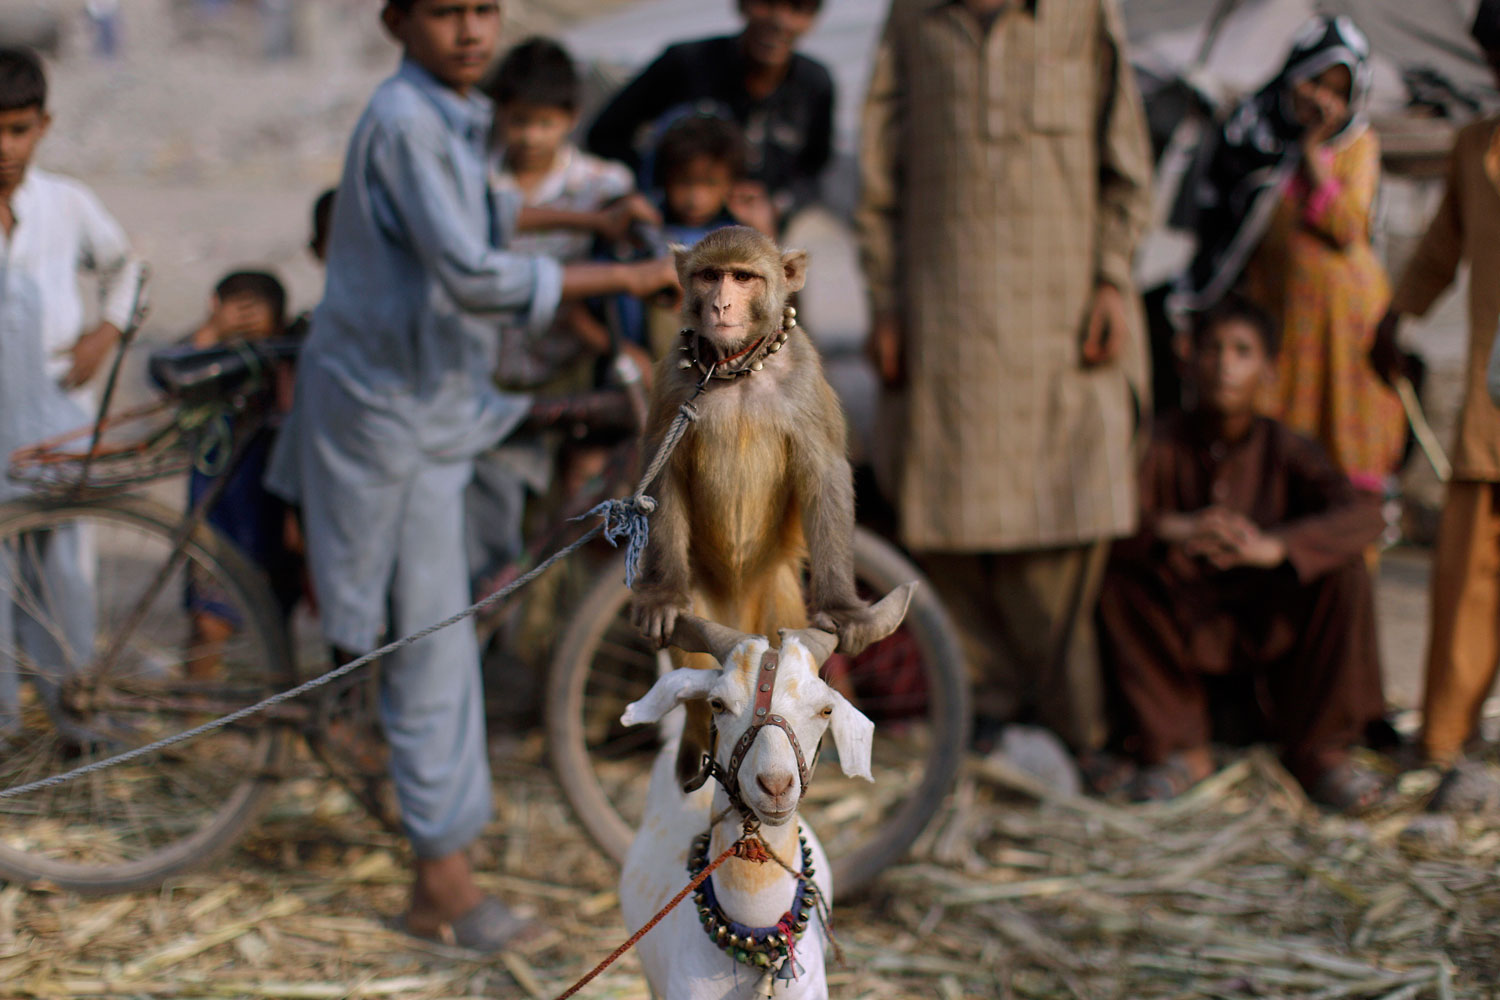 Pakistanis look at a trained monkey standing on a goat, in Lahore, Pakistan, Wednesday.